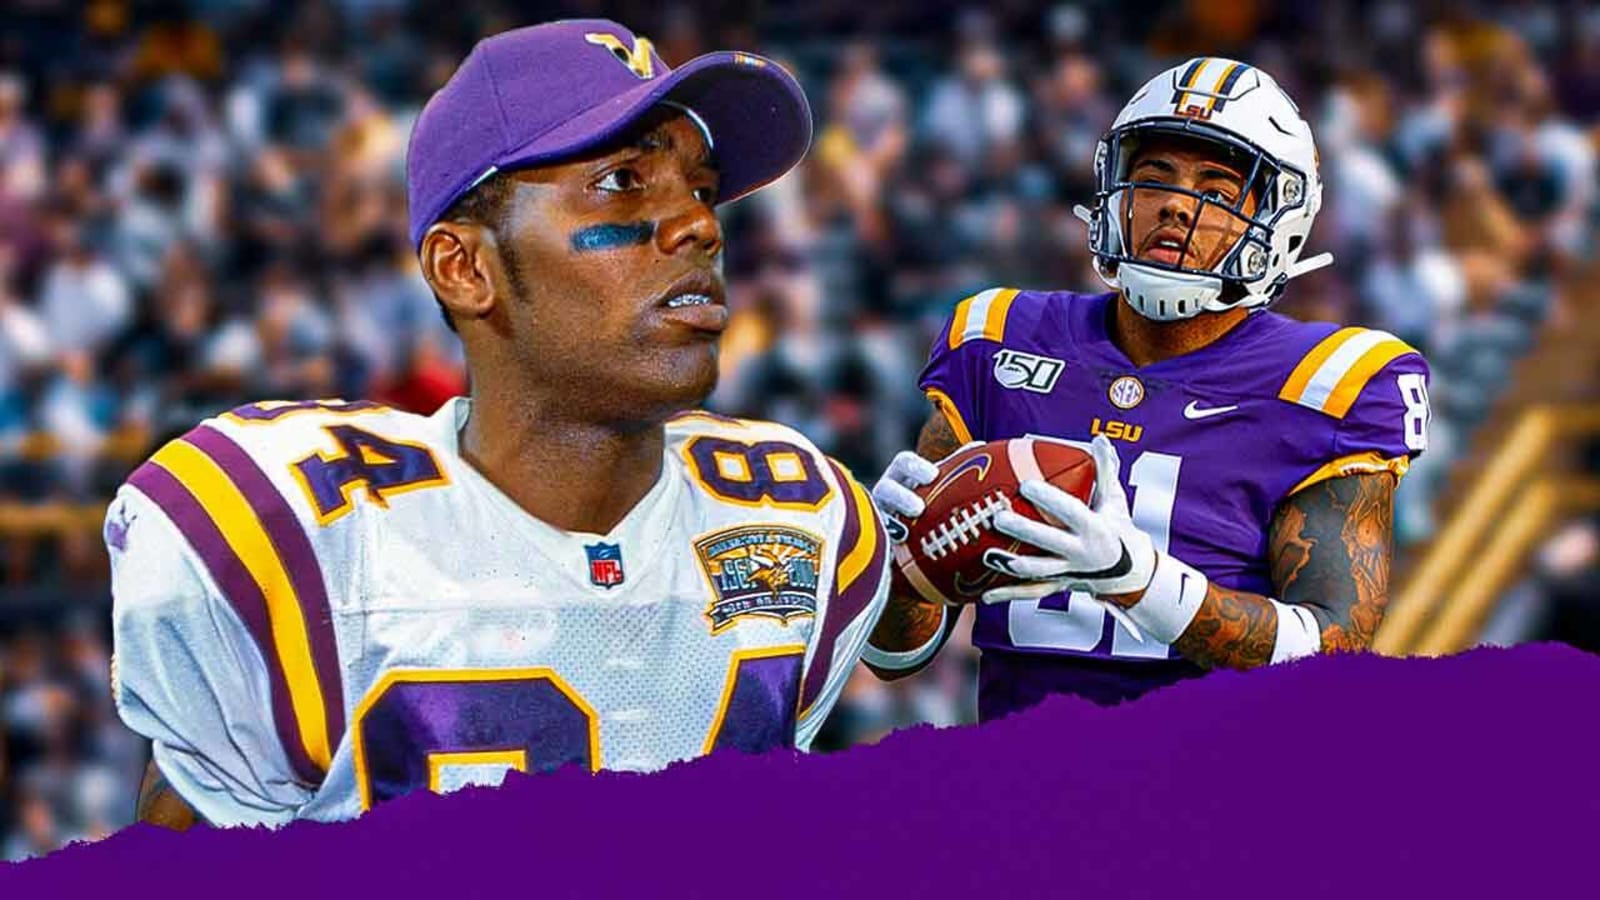 Randy Moss’ son makes final decision on NFL career